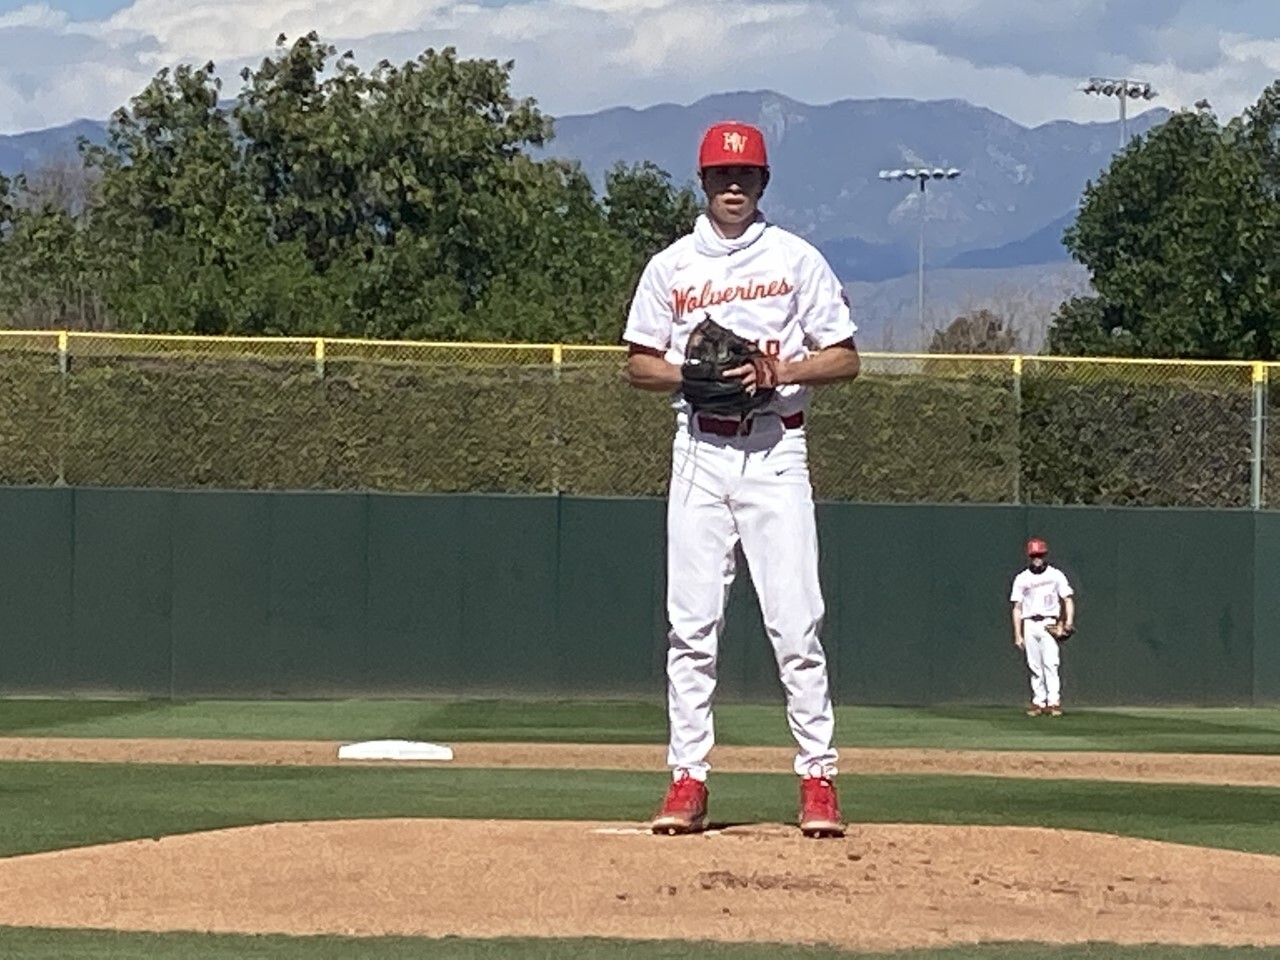 With wind blowing, Harvard Westlake wins battle of pitchers ...